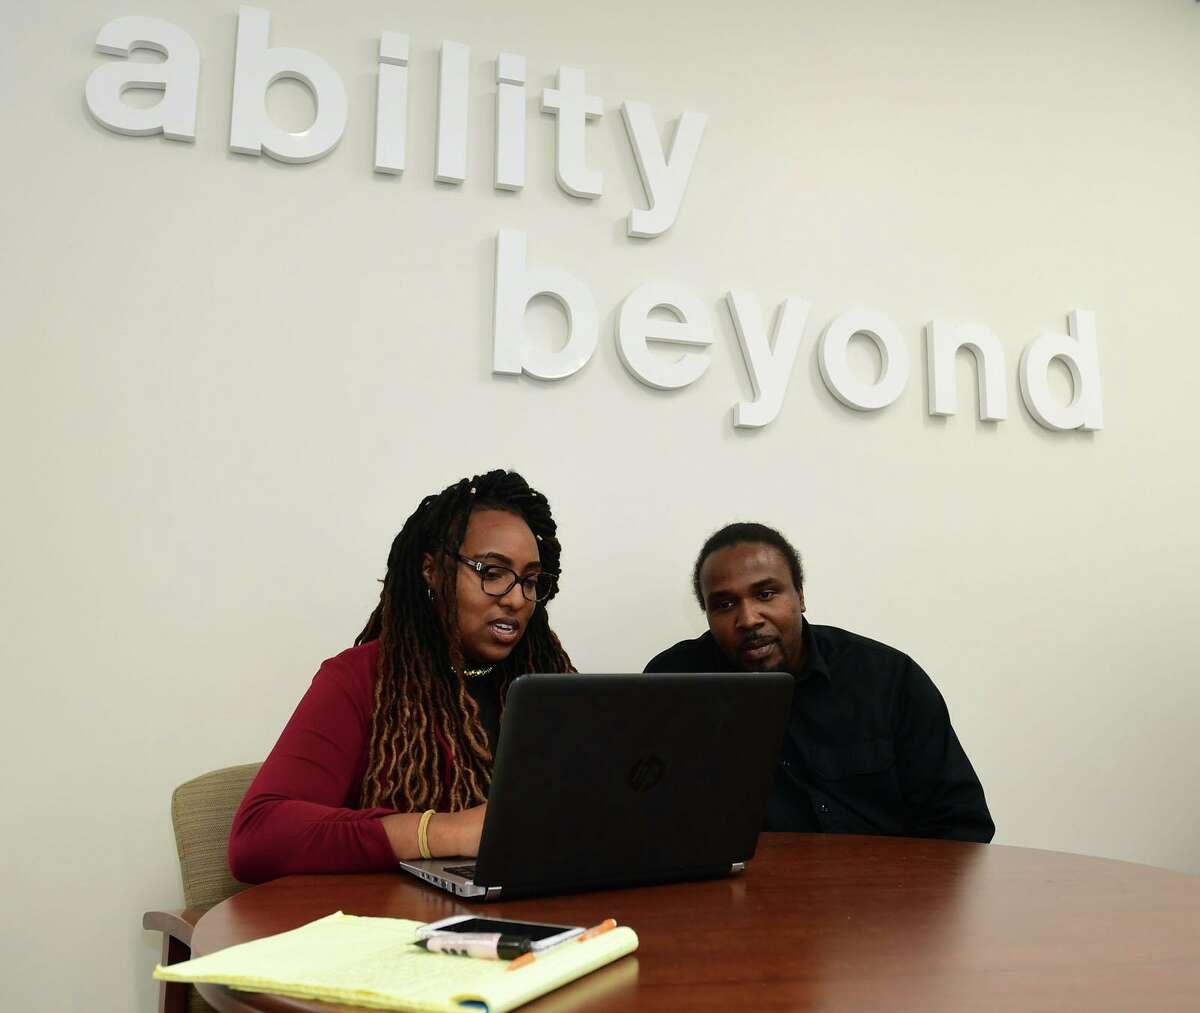 Employment Specialist Chenelle James helps client Earl Melton at The Bethel-based disabilities services giant, Ability Beyond facility in Norwalk, Conn. October is national disabilities awareness month.